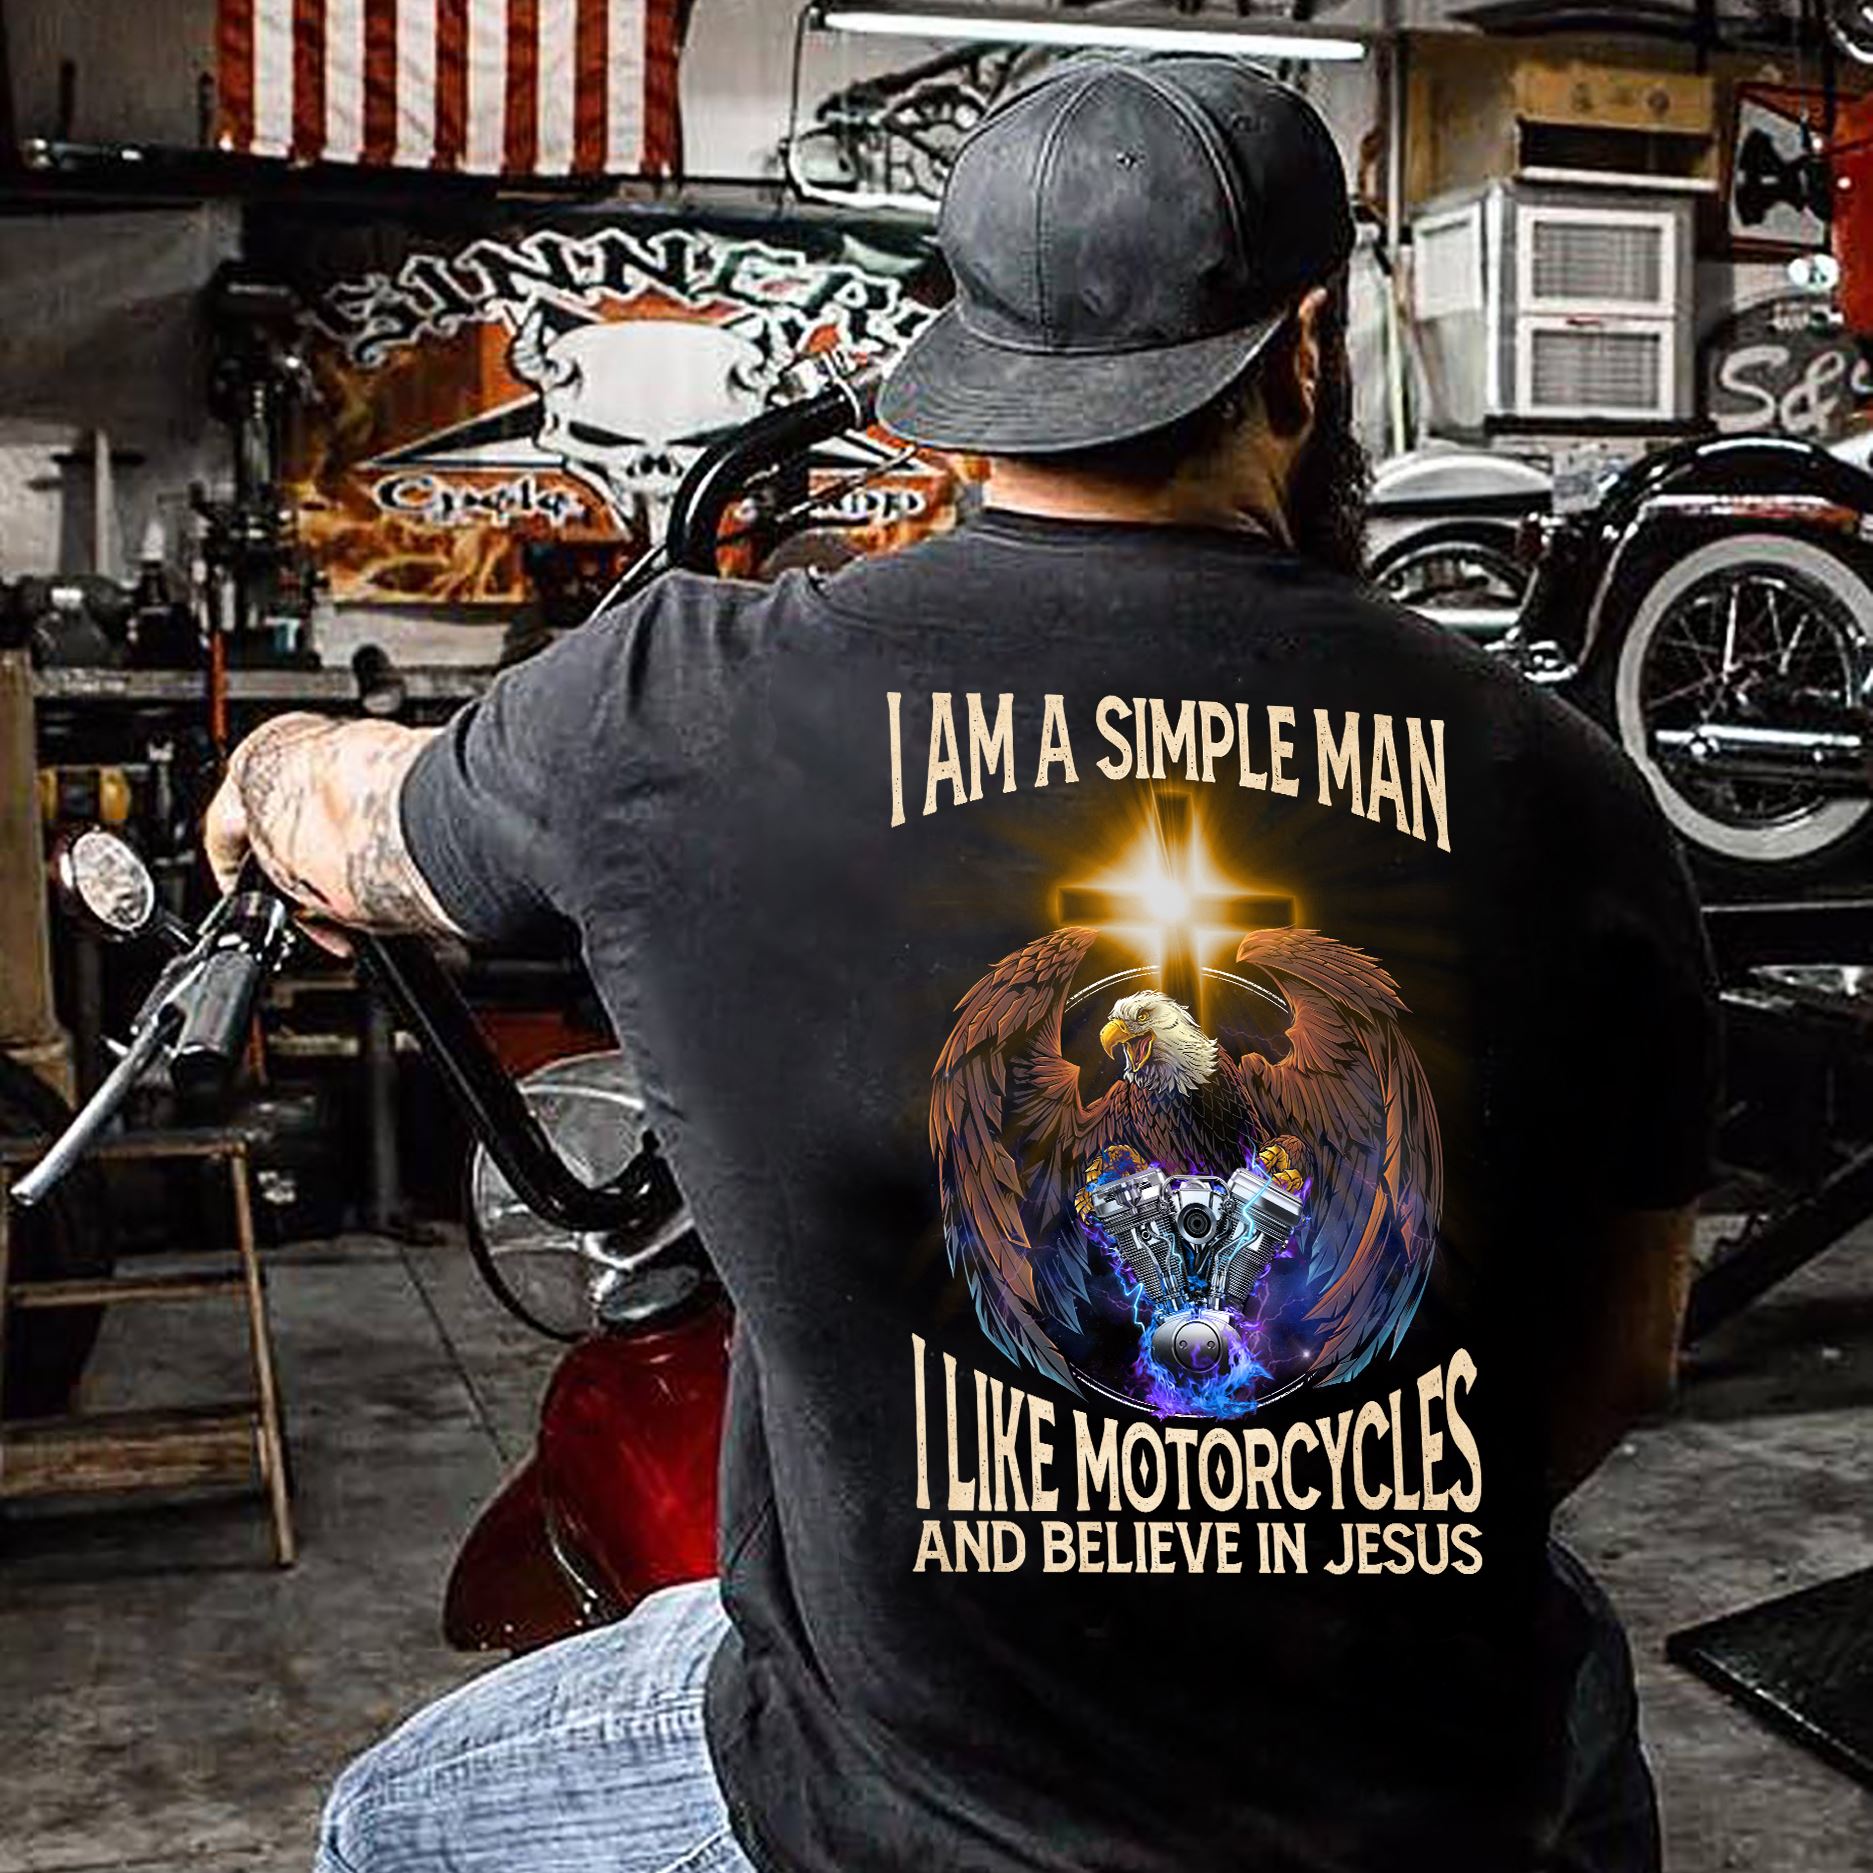 I am a simple man I like motorcycles and believe in Jesus - Jesus and motorcycles